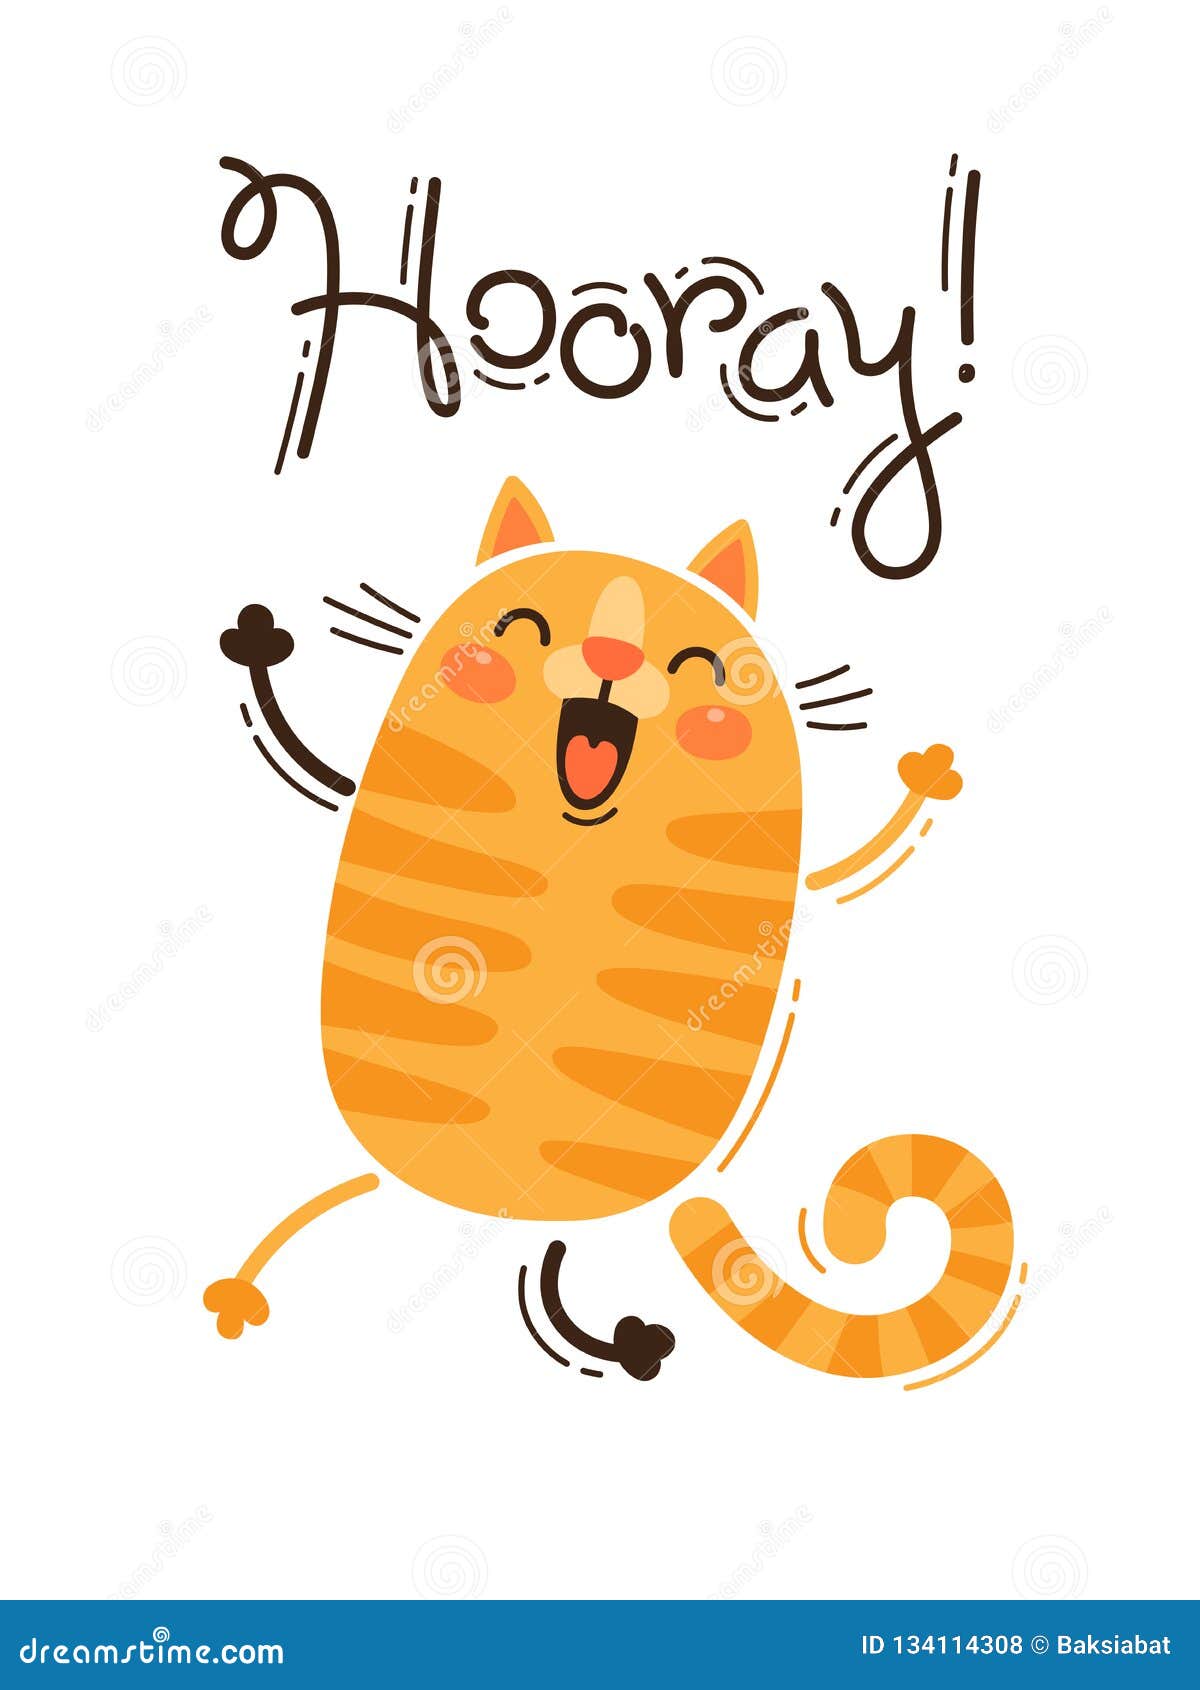 Hooray Cartoons, Illustrations & Vector Stock Images - 1039 Pictures to